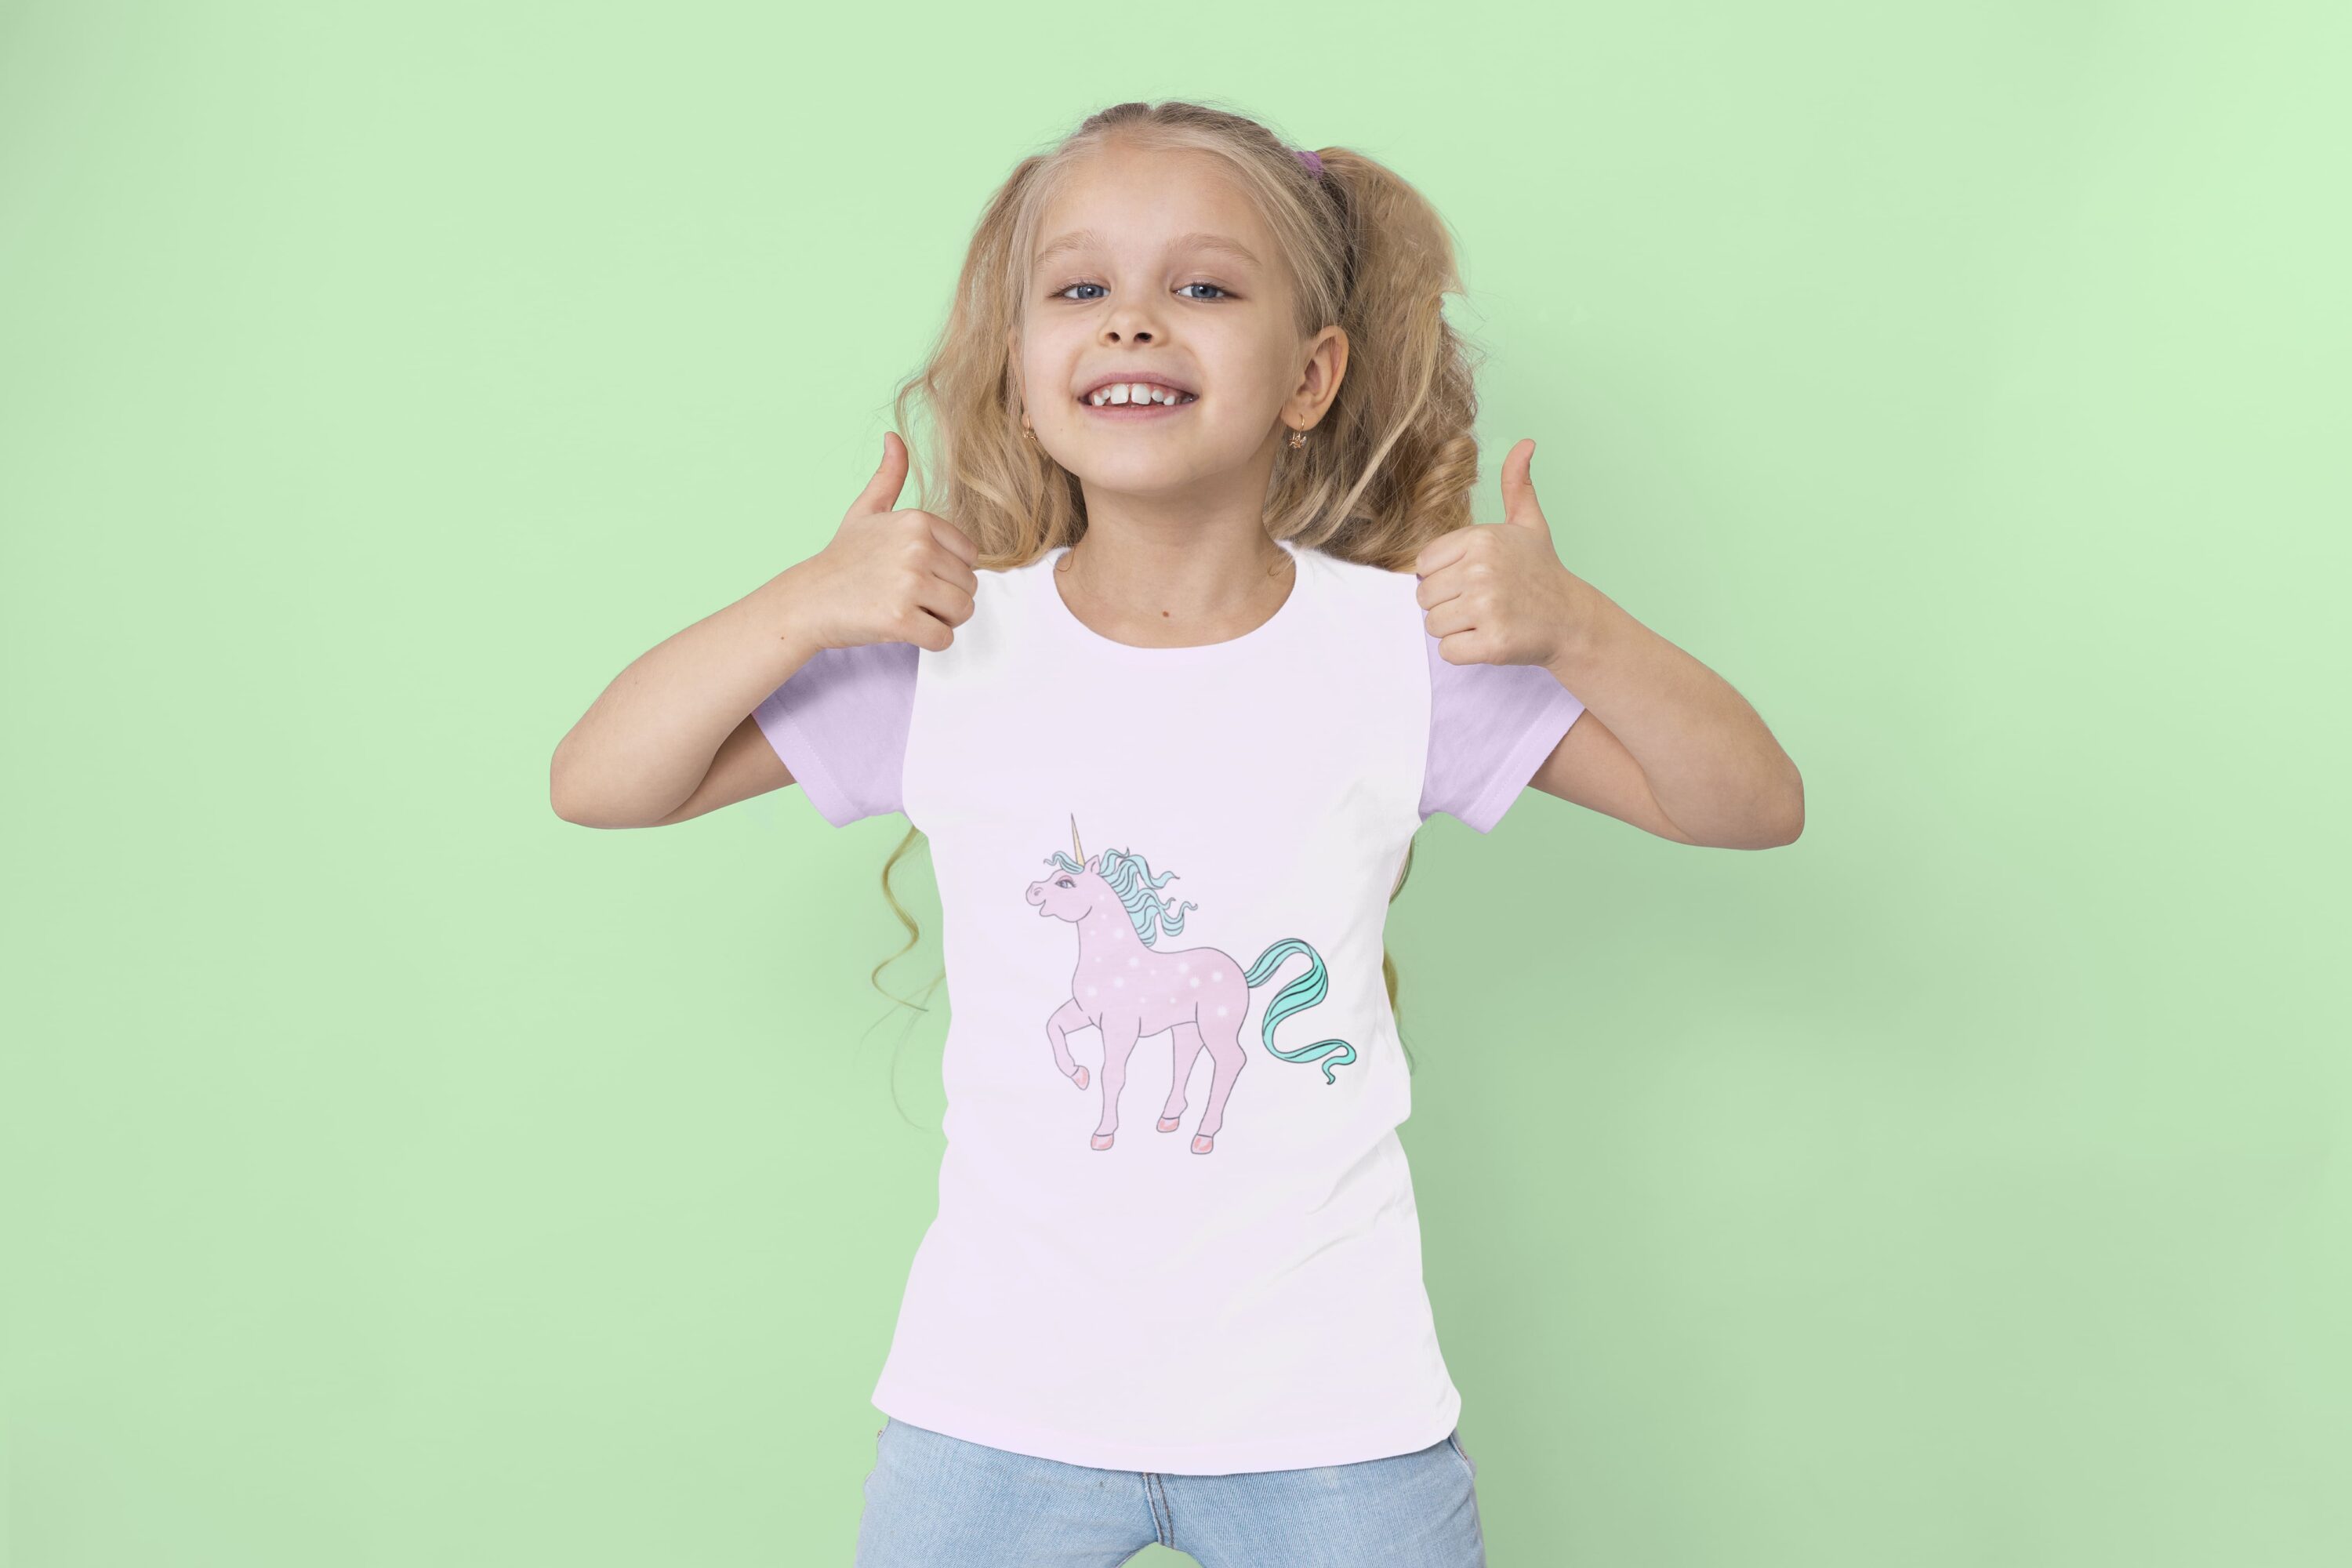 White t-shirt with lavender sleeves and a magical unicorn, on a girl on a mint background.